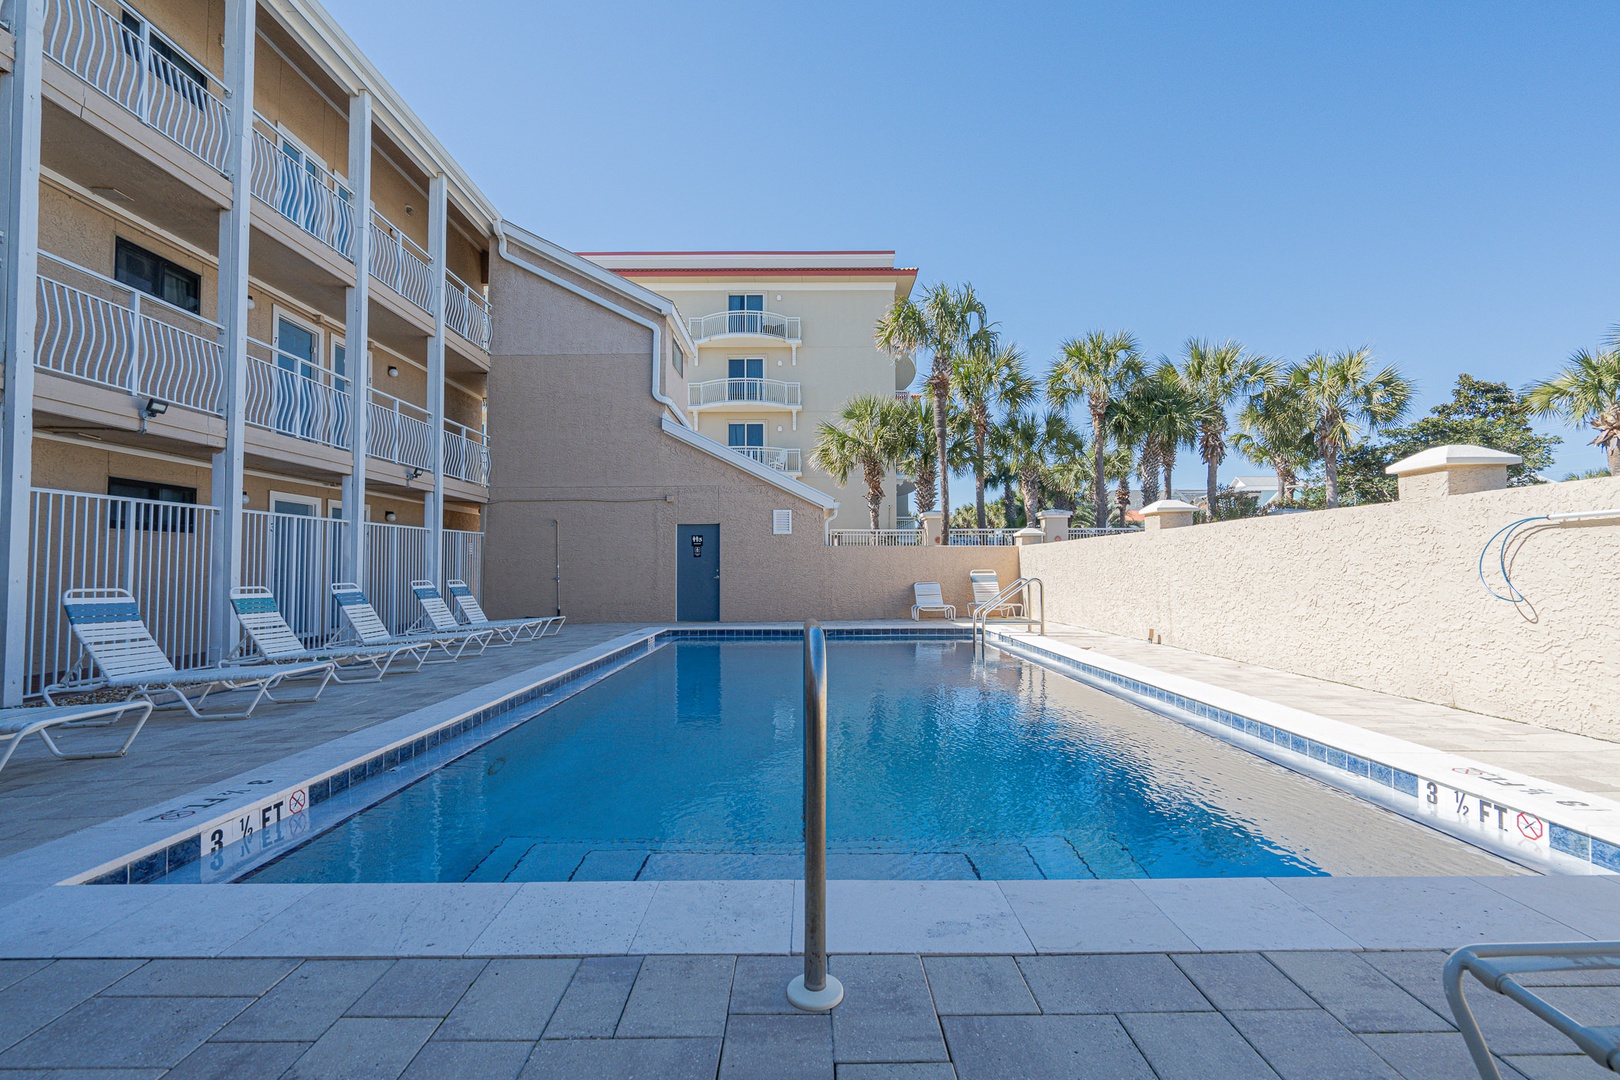 Immerse yourself in the amenities offered by the beachfront complex